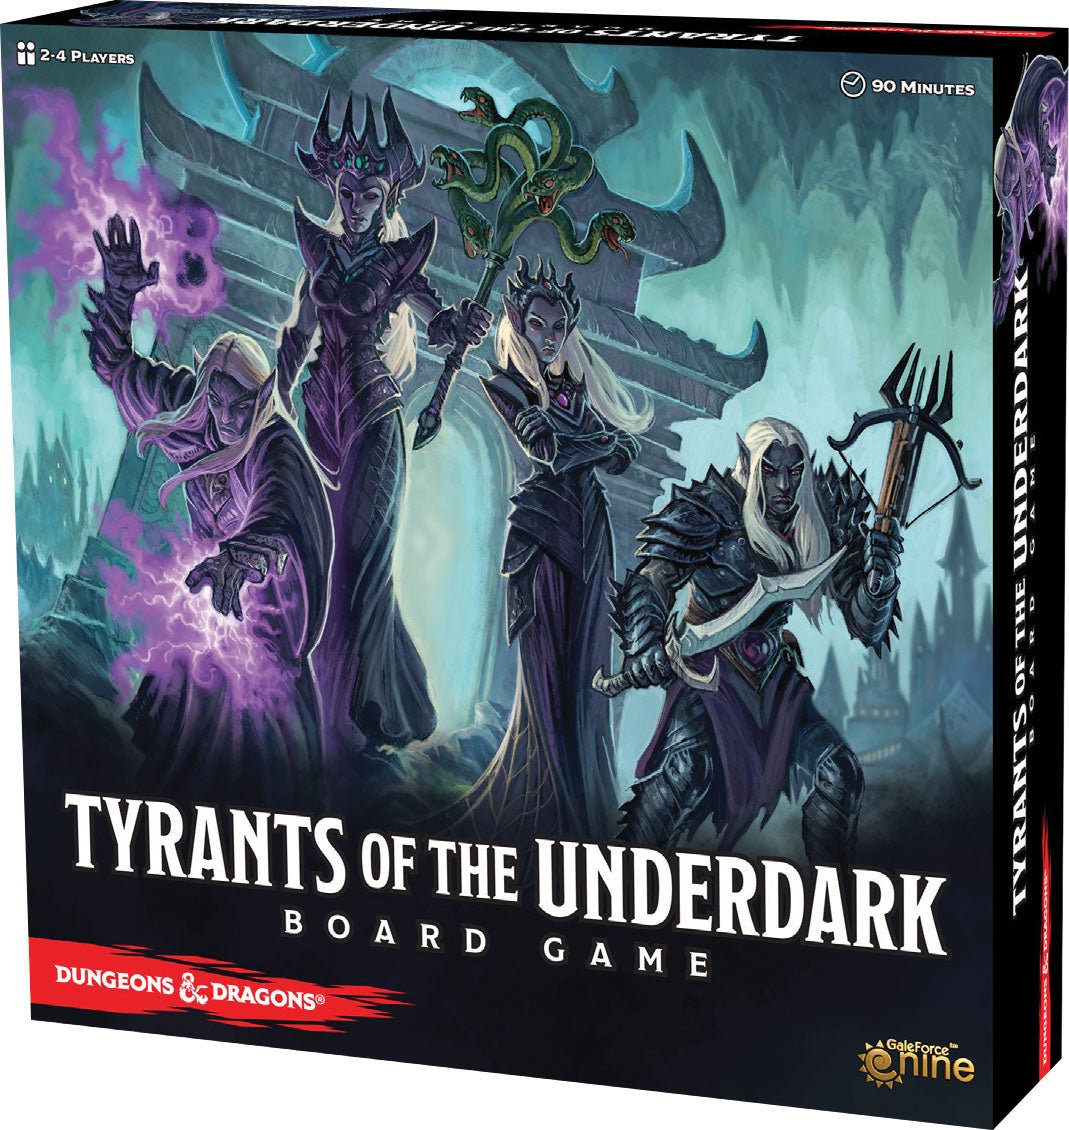 Dungeons and Dragons: Tyrants of the Underdark Board Game (Updated Edition) - The Compleat Strategist